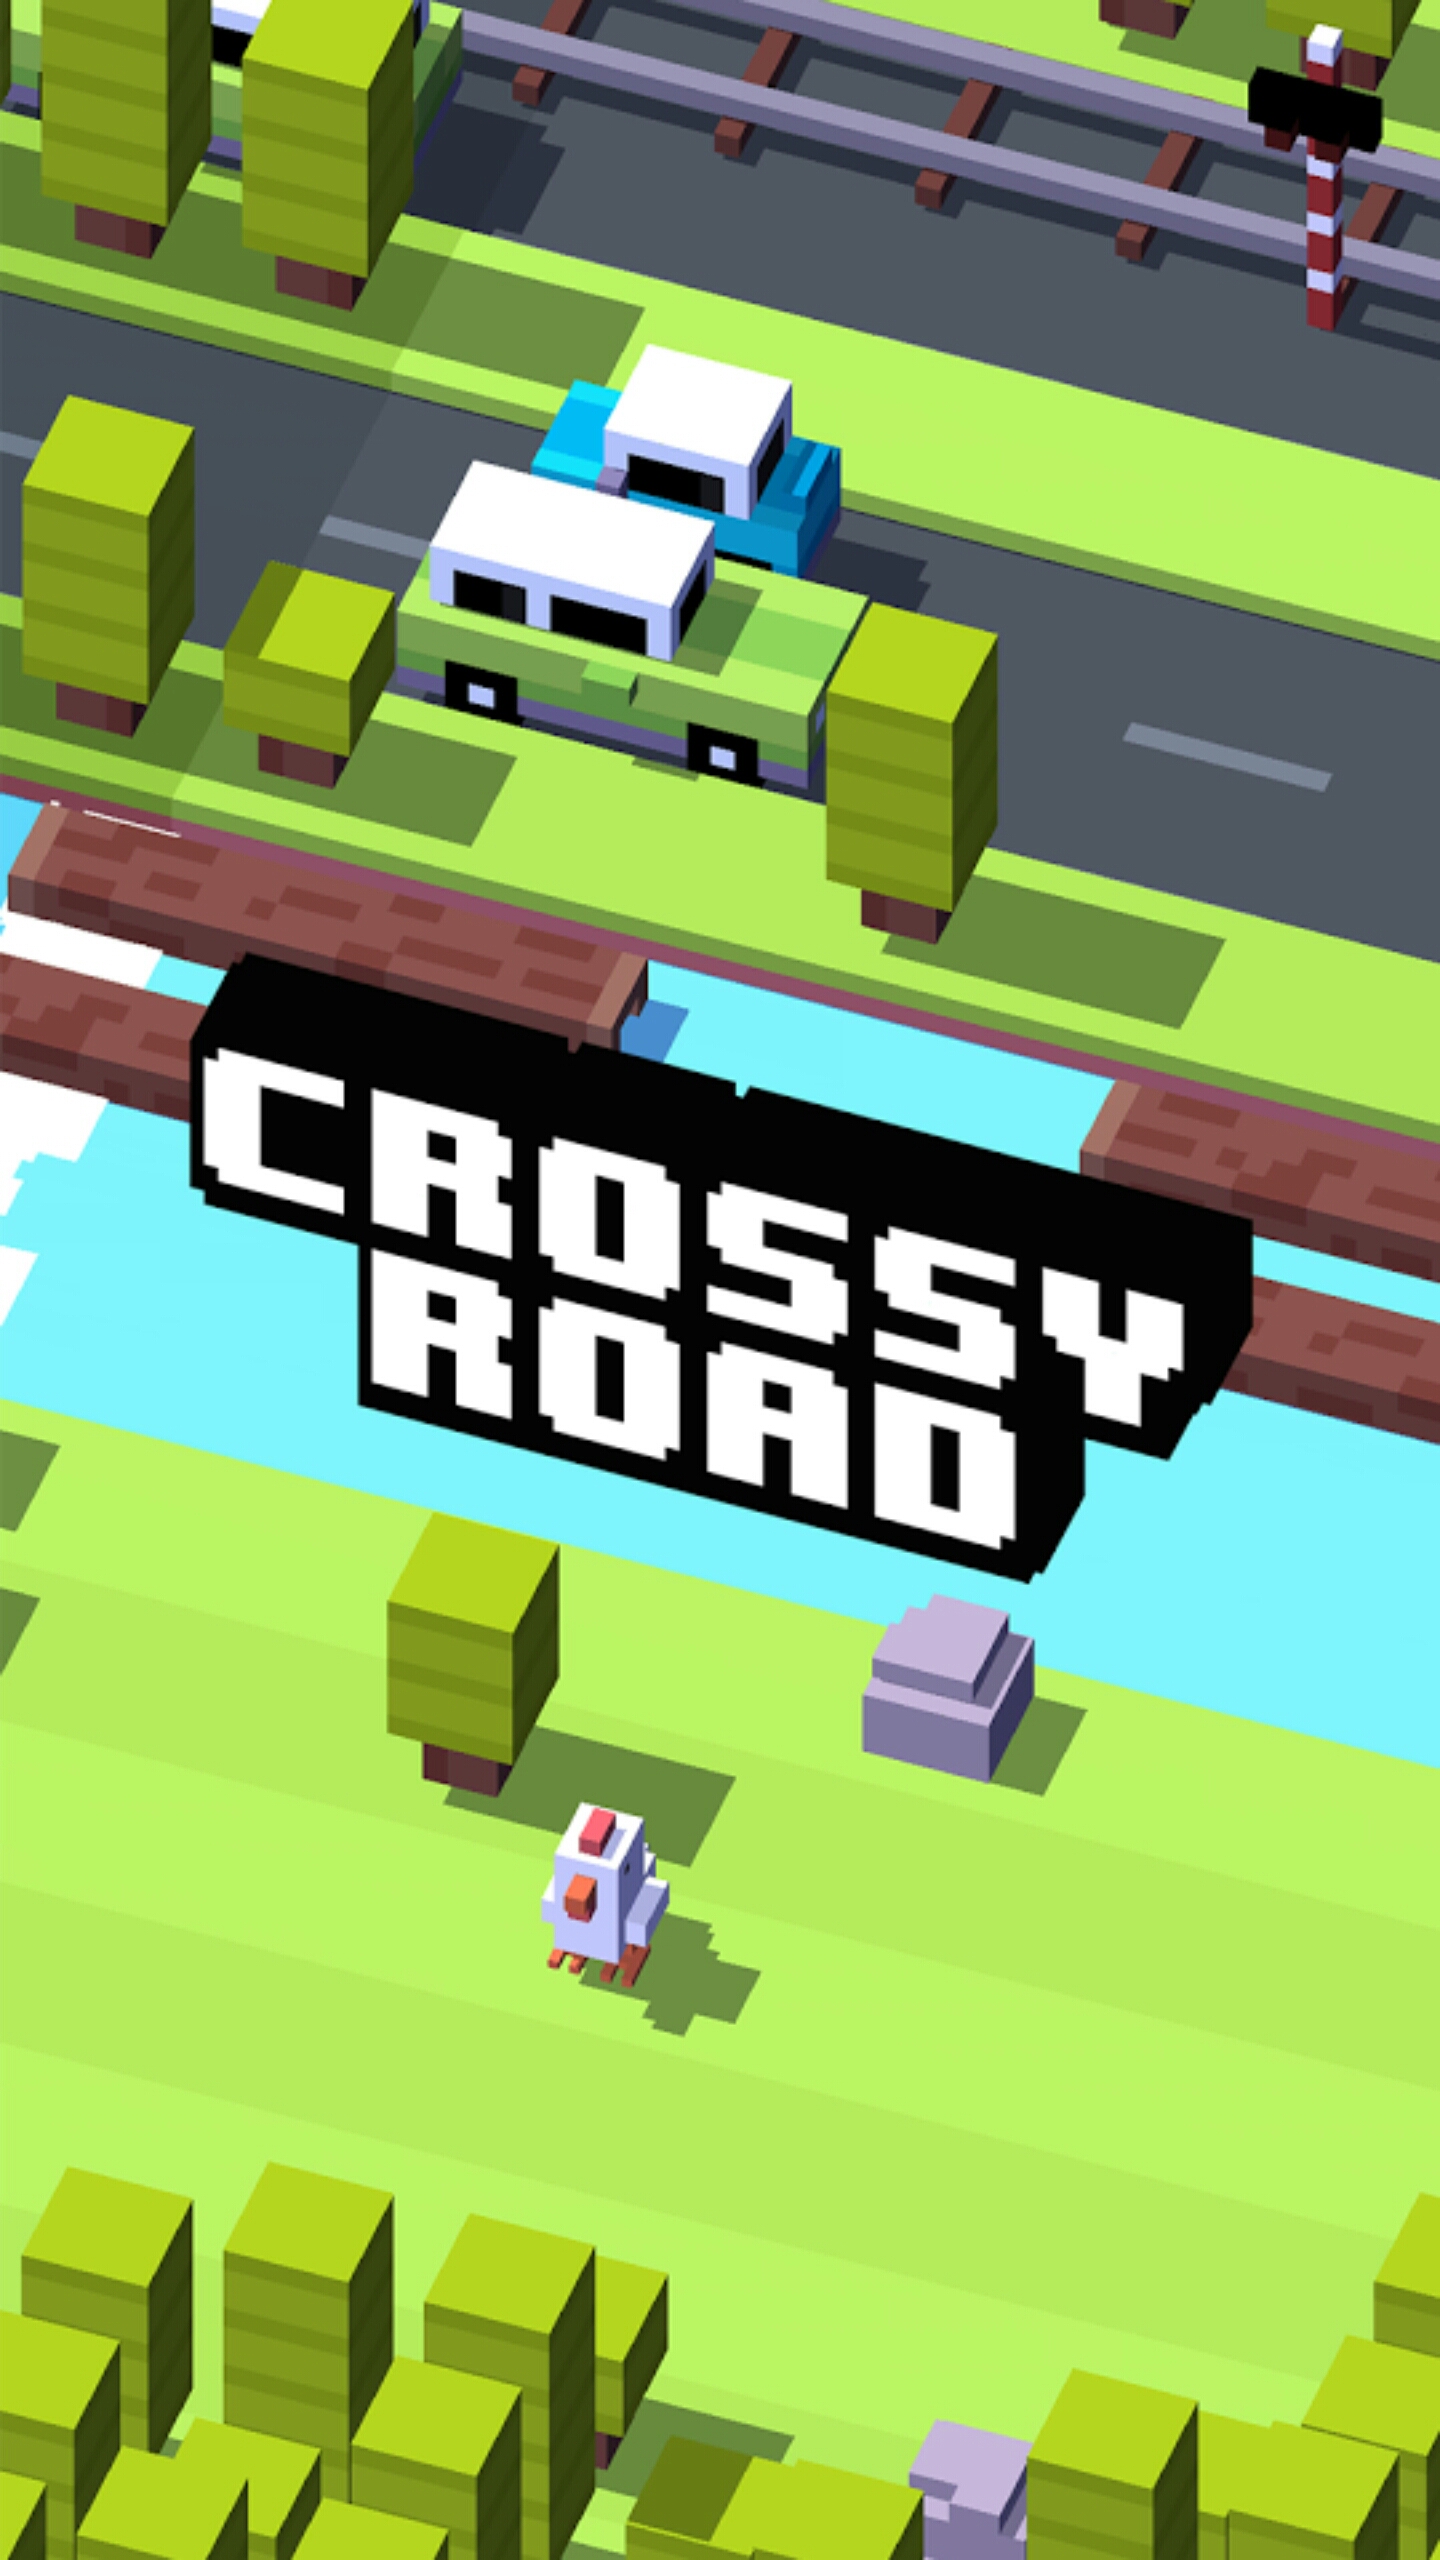 game crossy road